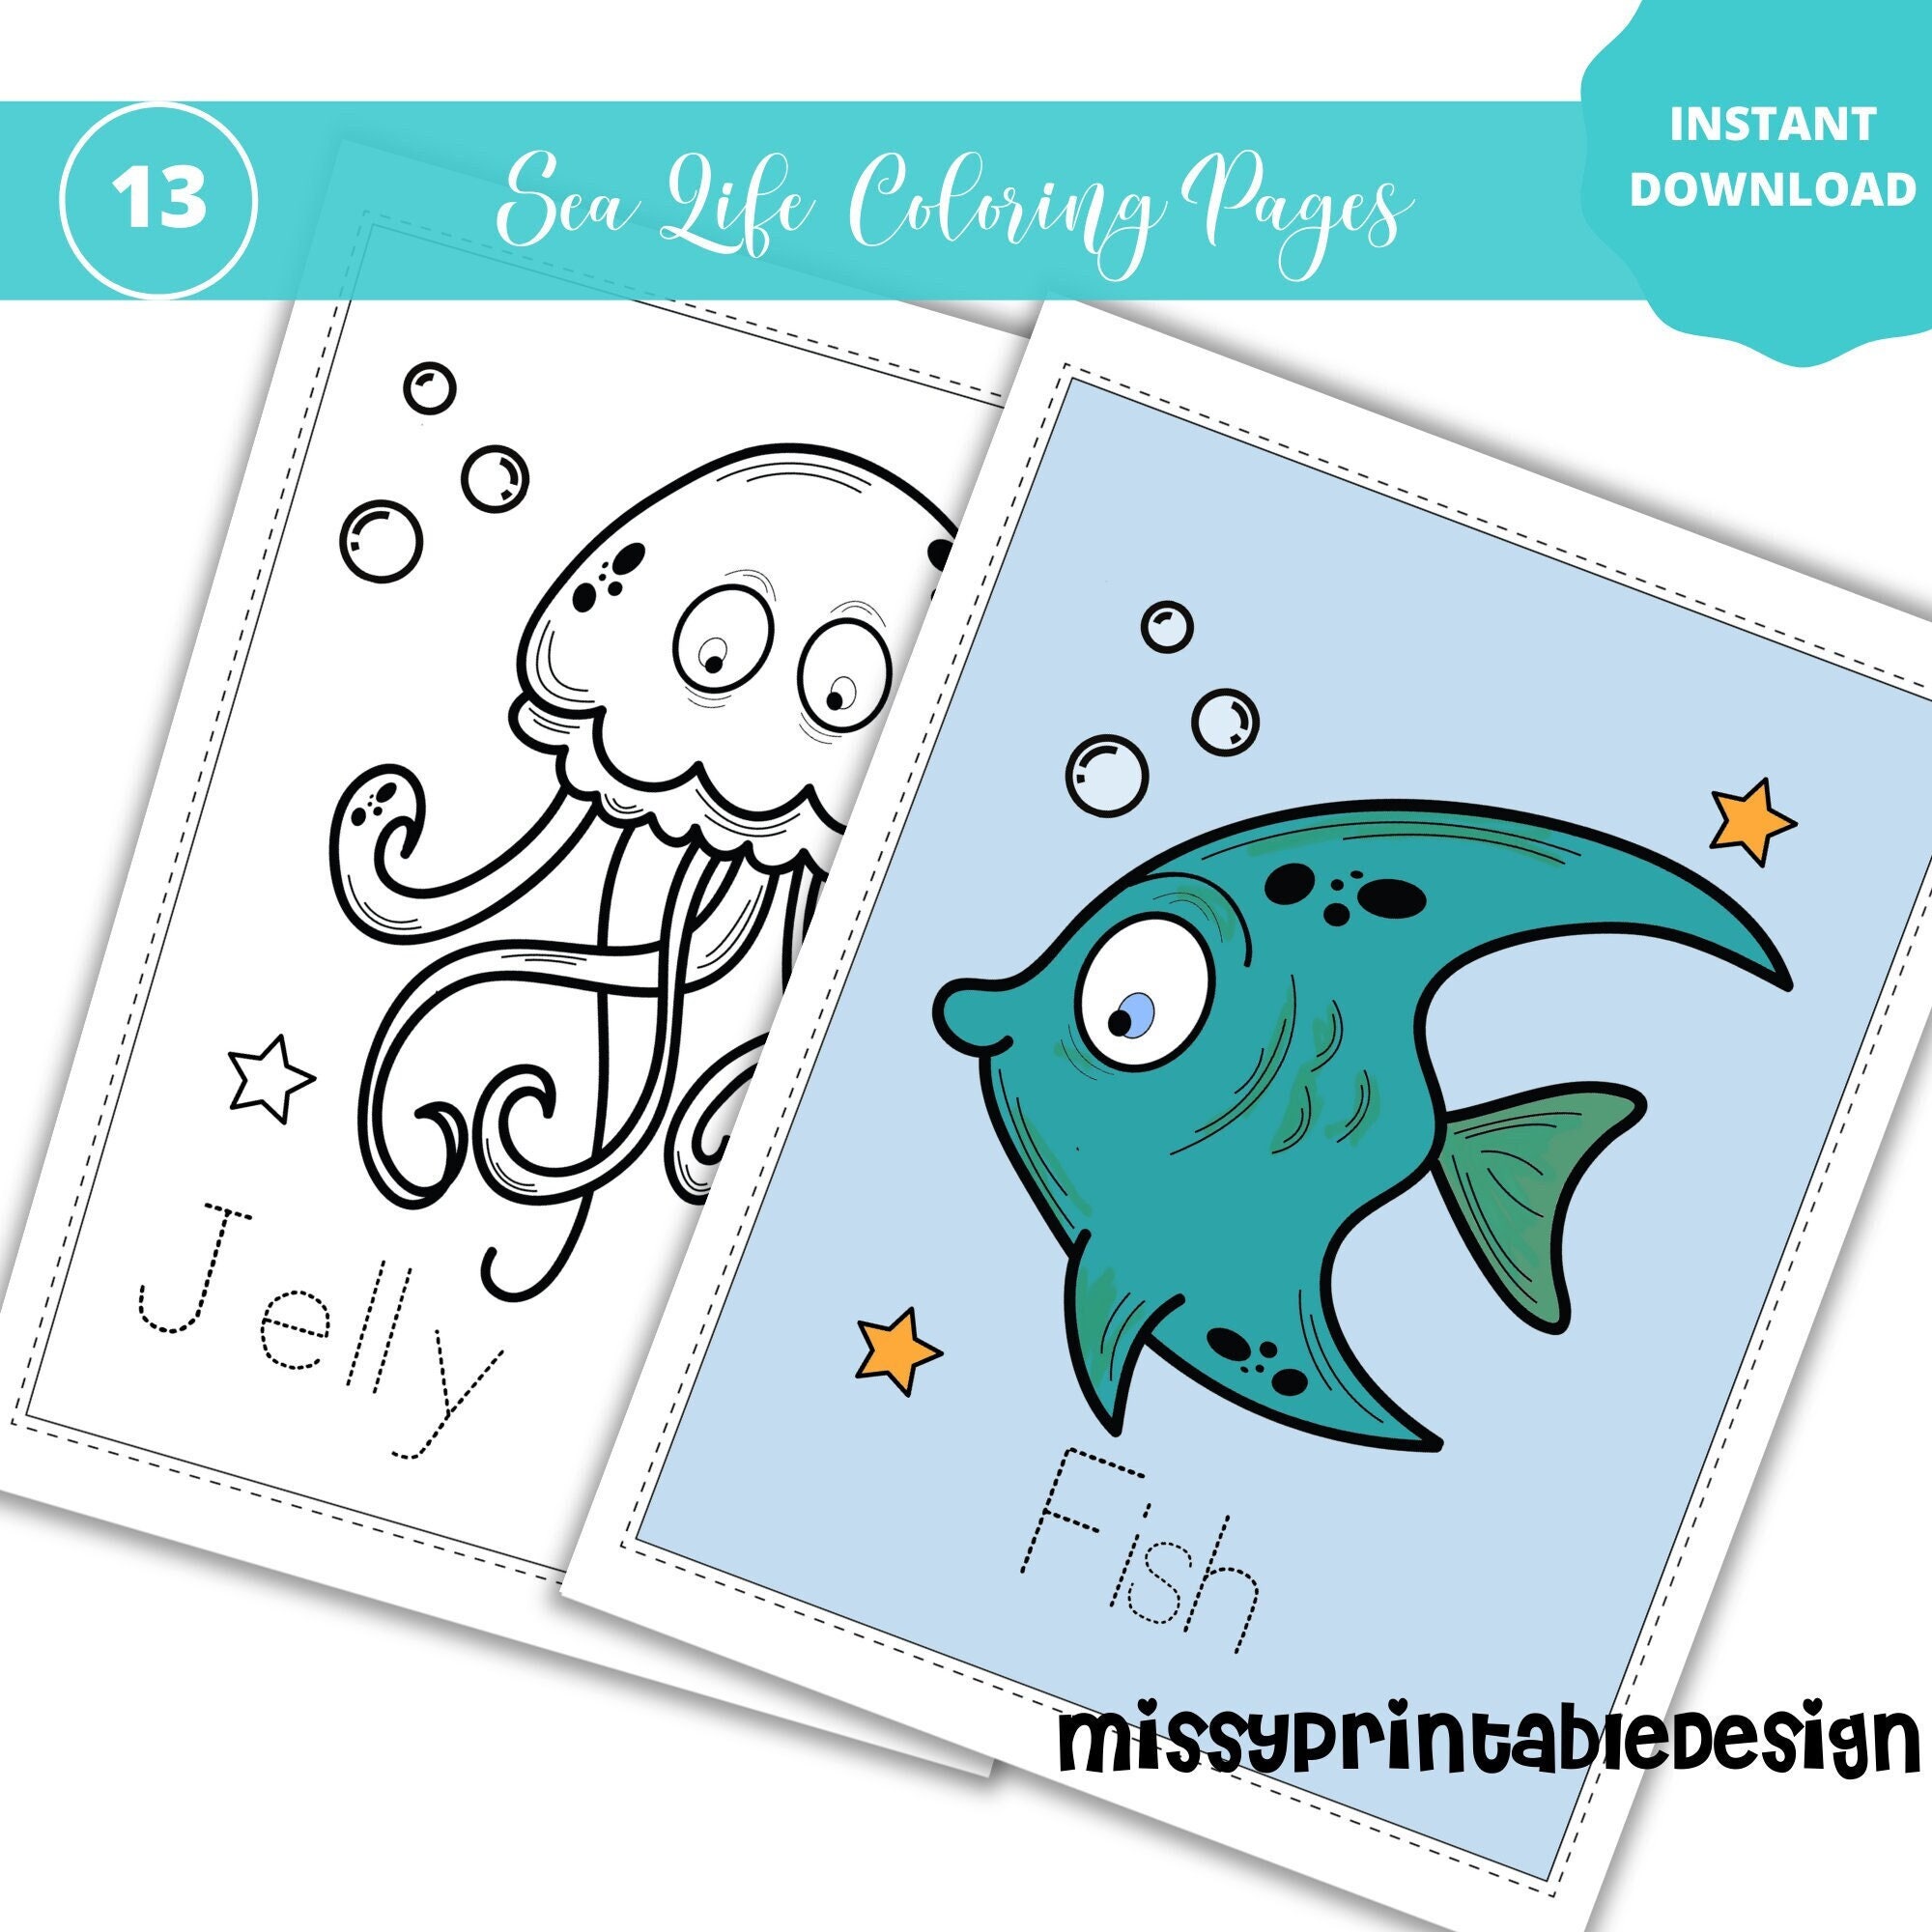 Sea life coloring pages printable educational kids coloring pages sea life birthday party educational worksheet instant download